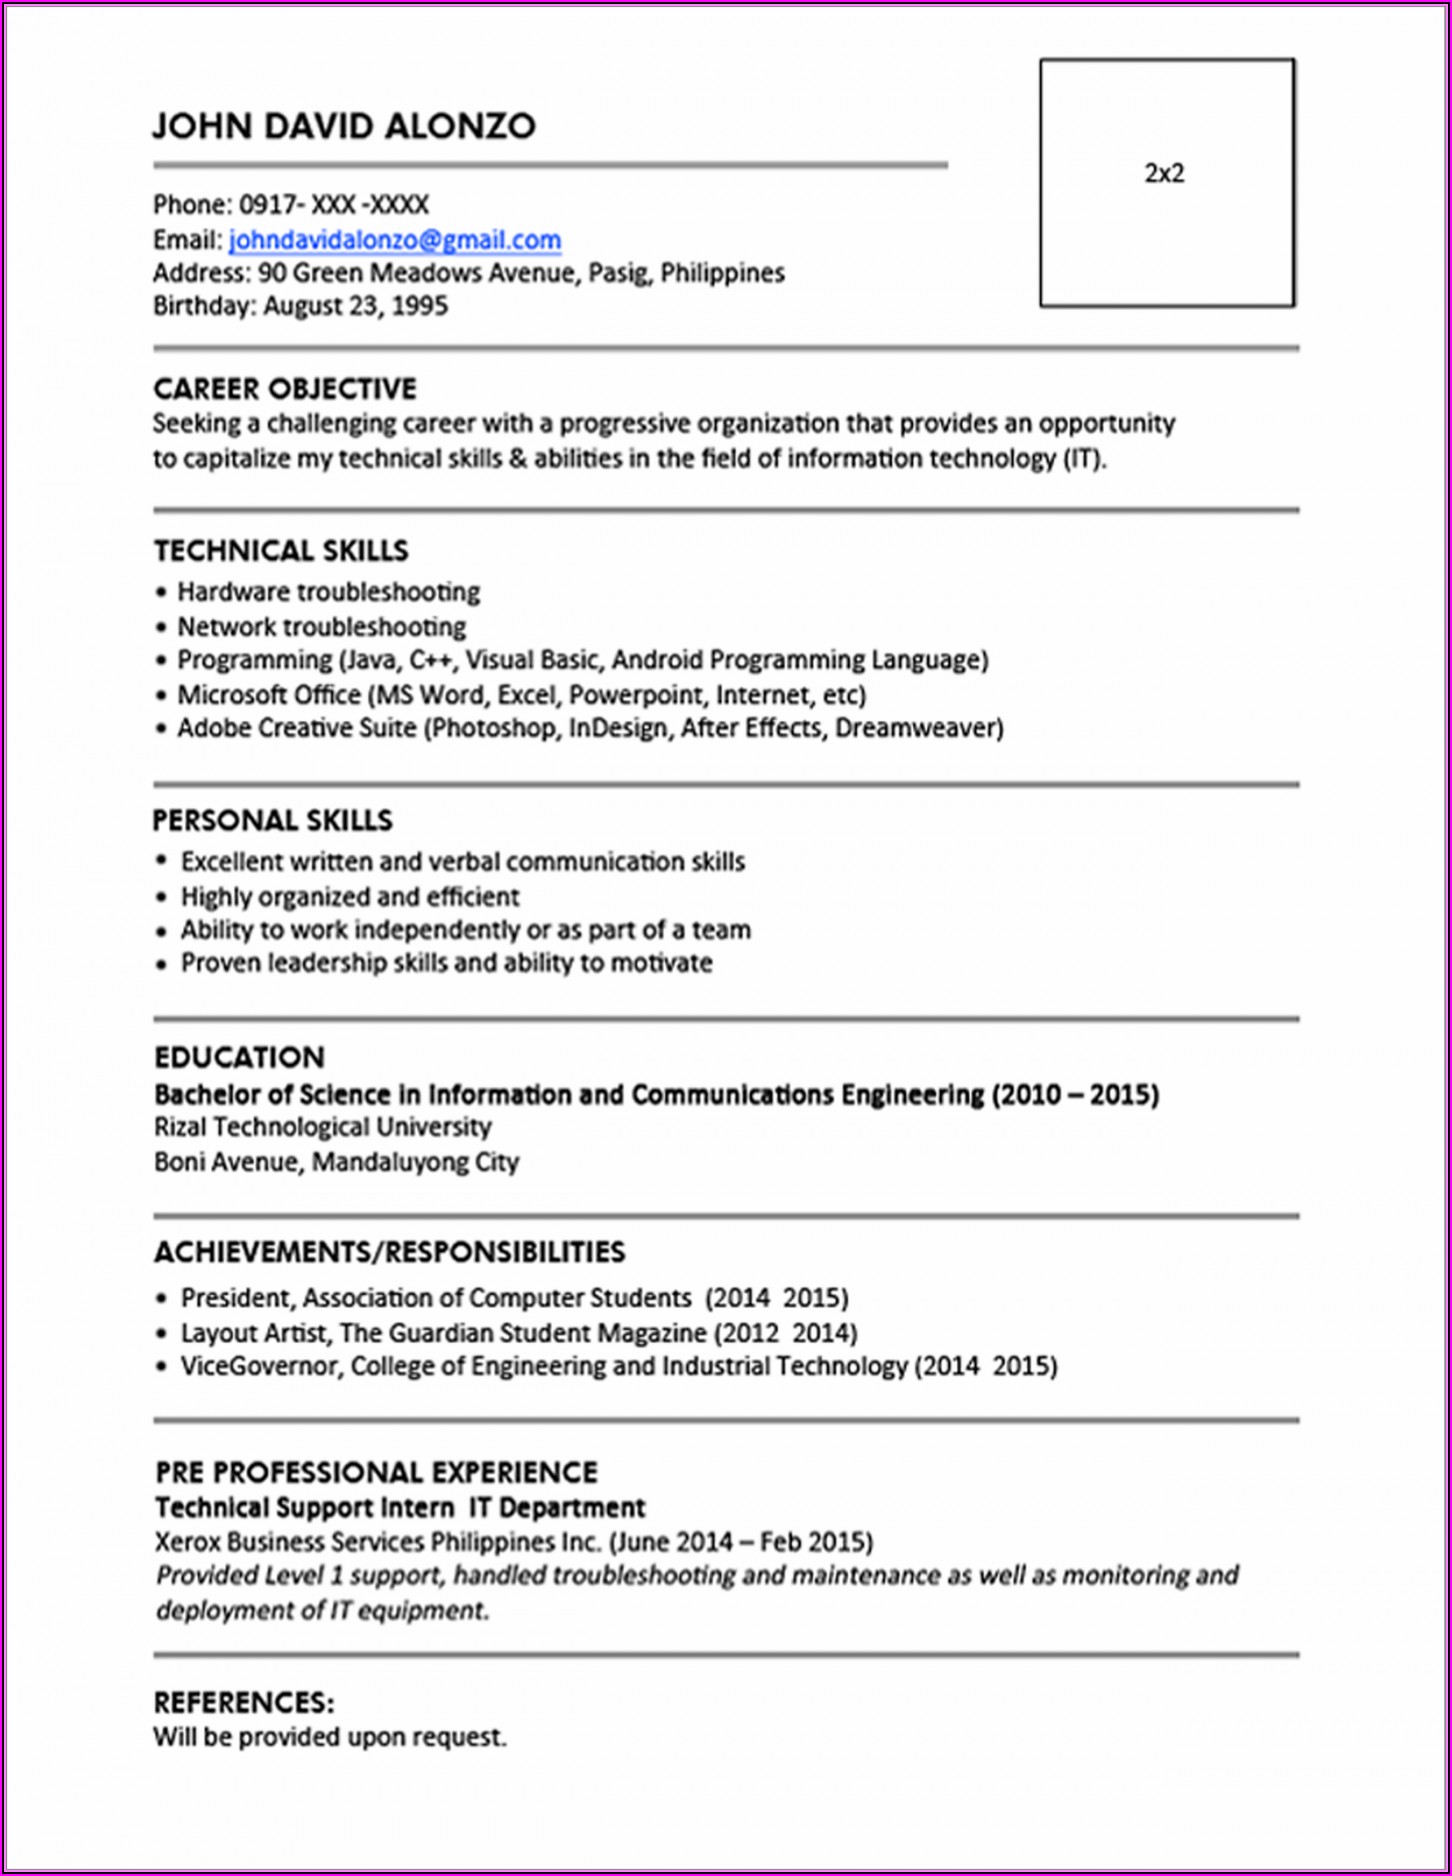 Resume Format For It Professional Freshers